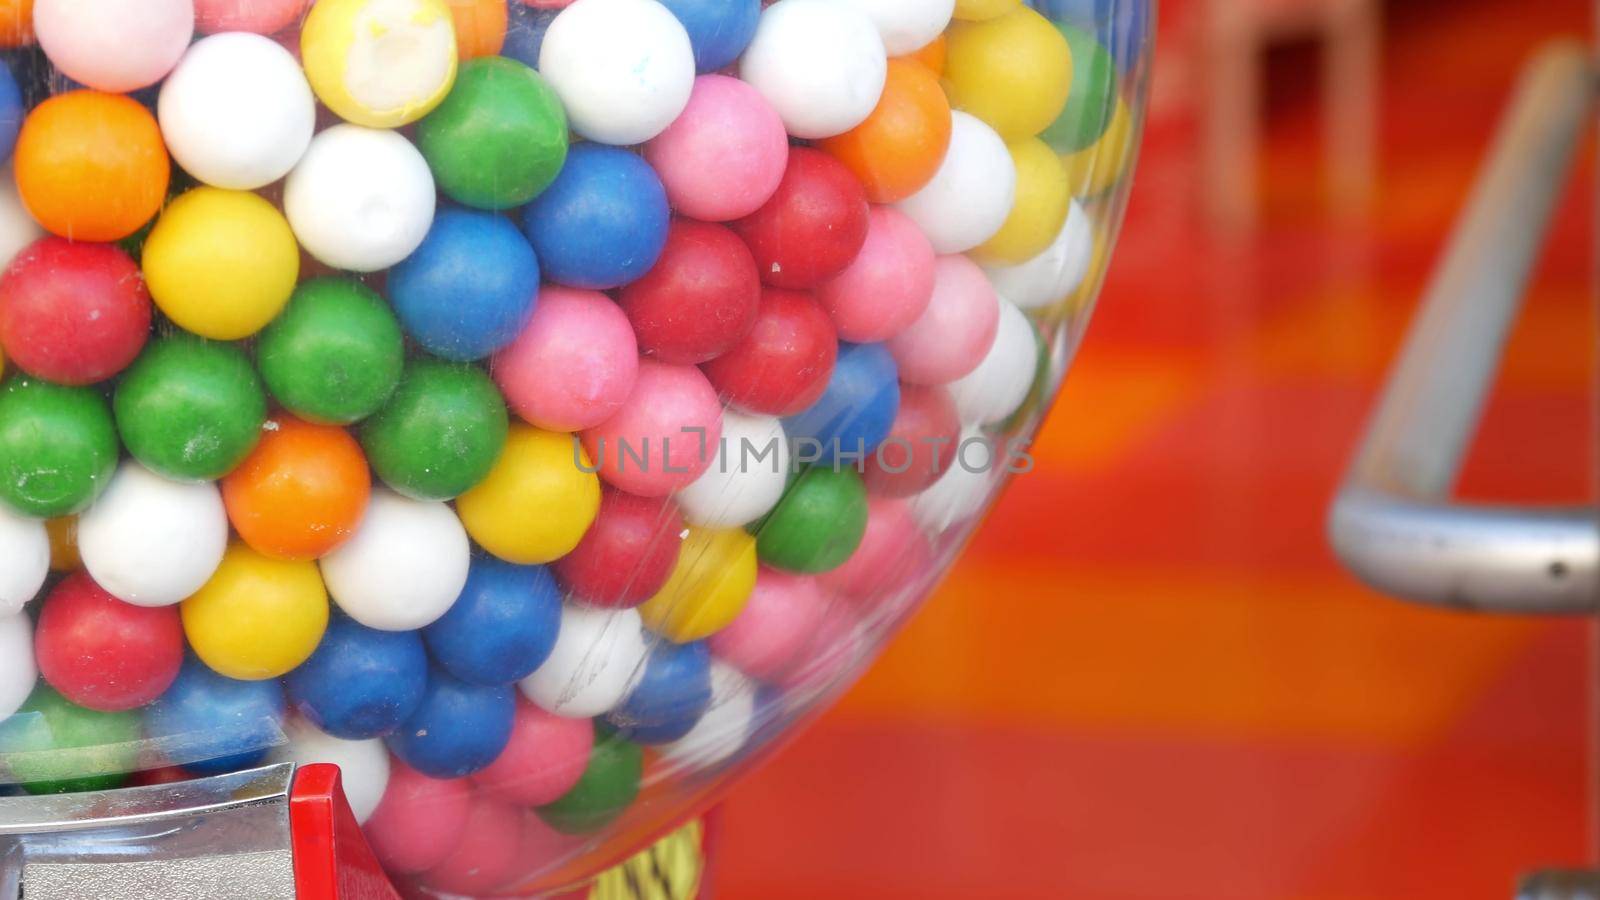 Colorful gumballs in classic vending machine, USA. Multi colored buble gums, coin operated retro dispenser. Chewing gum candies as symbol of childhood and summertime. Mixed sweets in vintage automate by DogoraSun